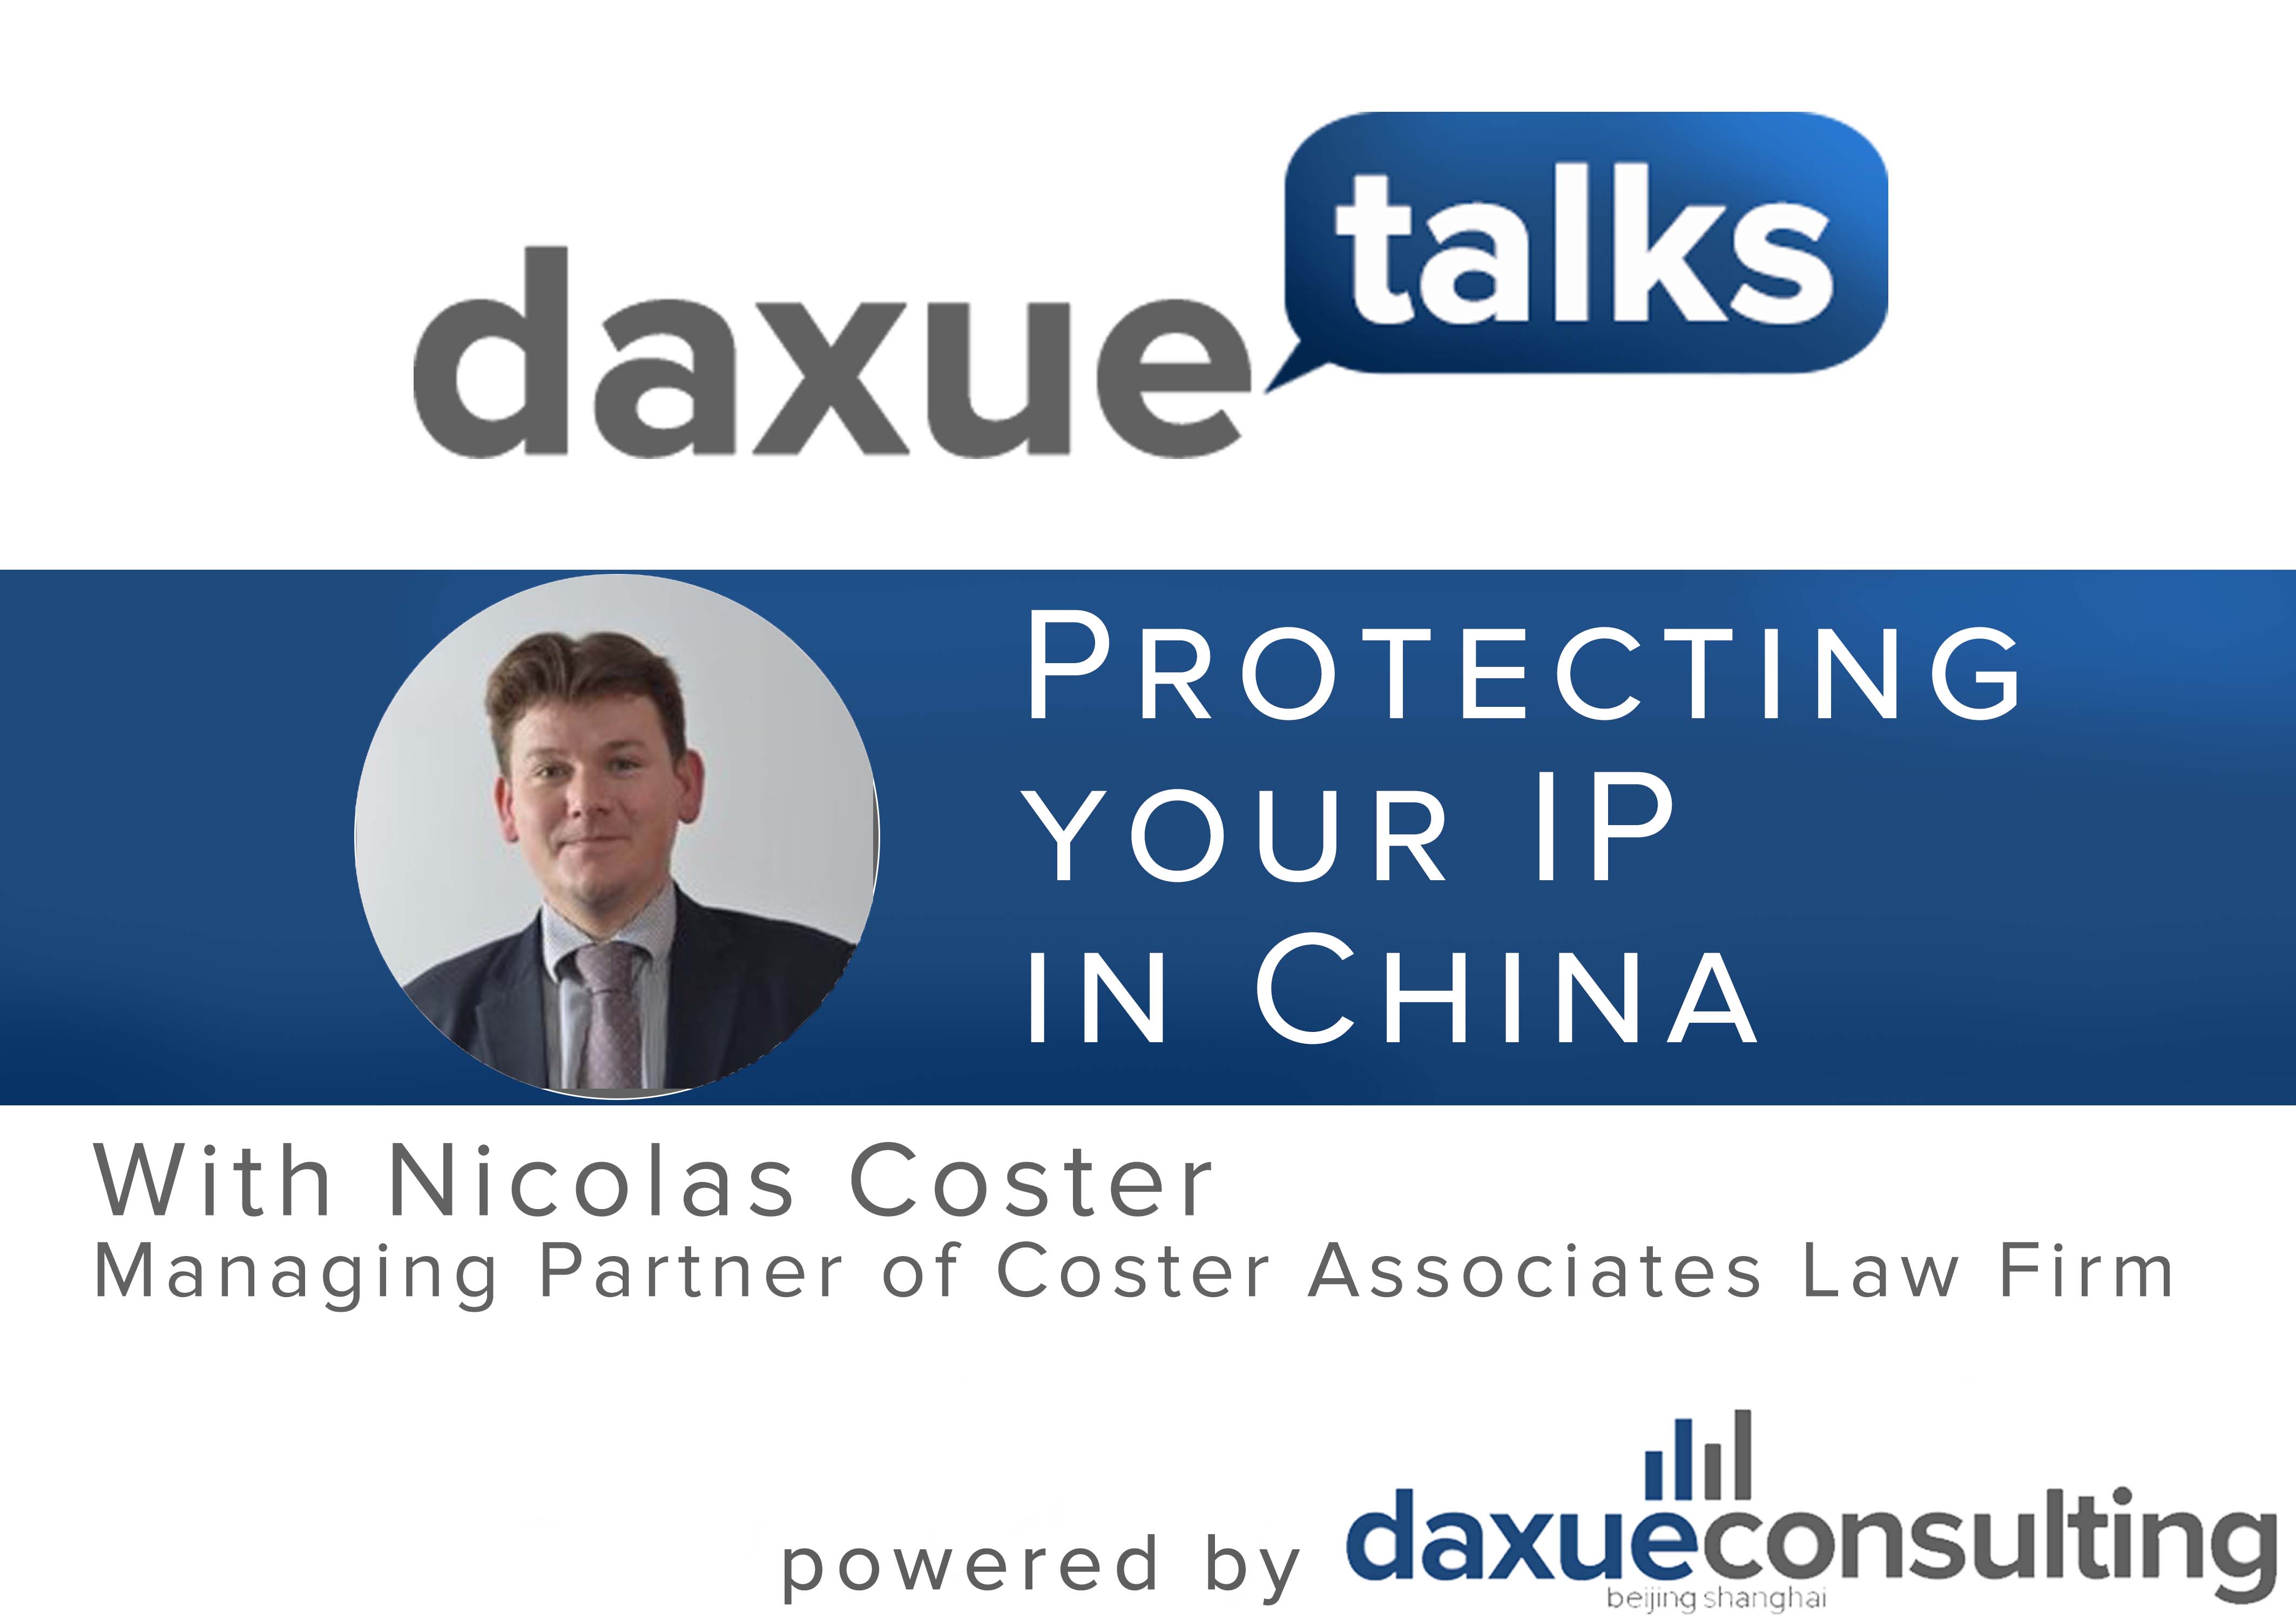 Daxue Talks 1: Protecting intellectual property rights in China, advice from a business lawyer